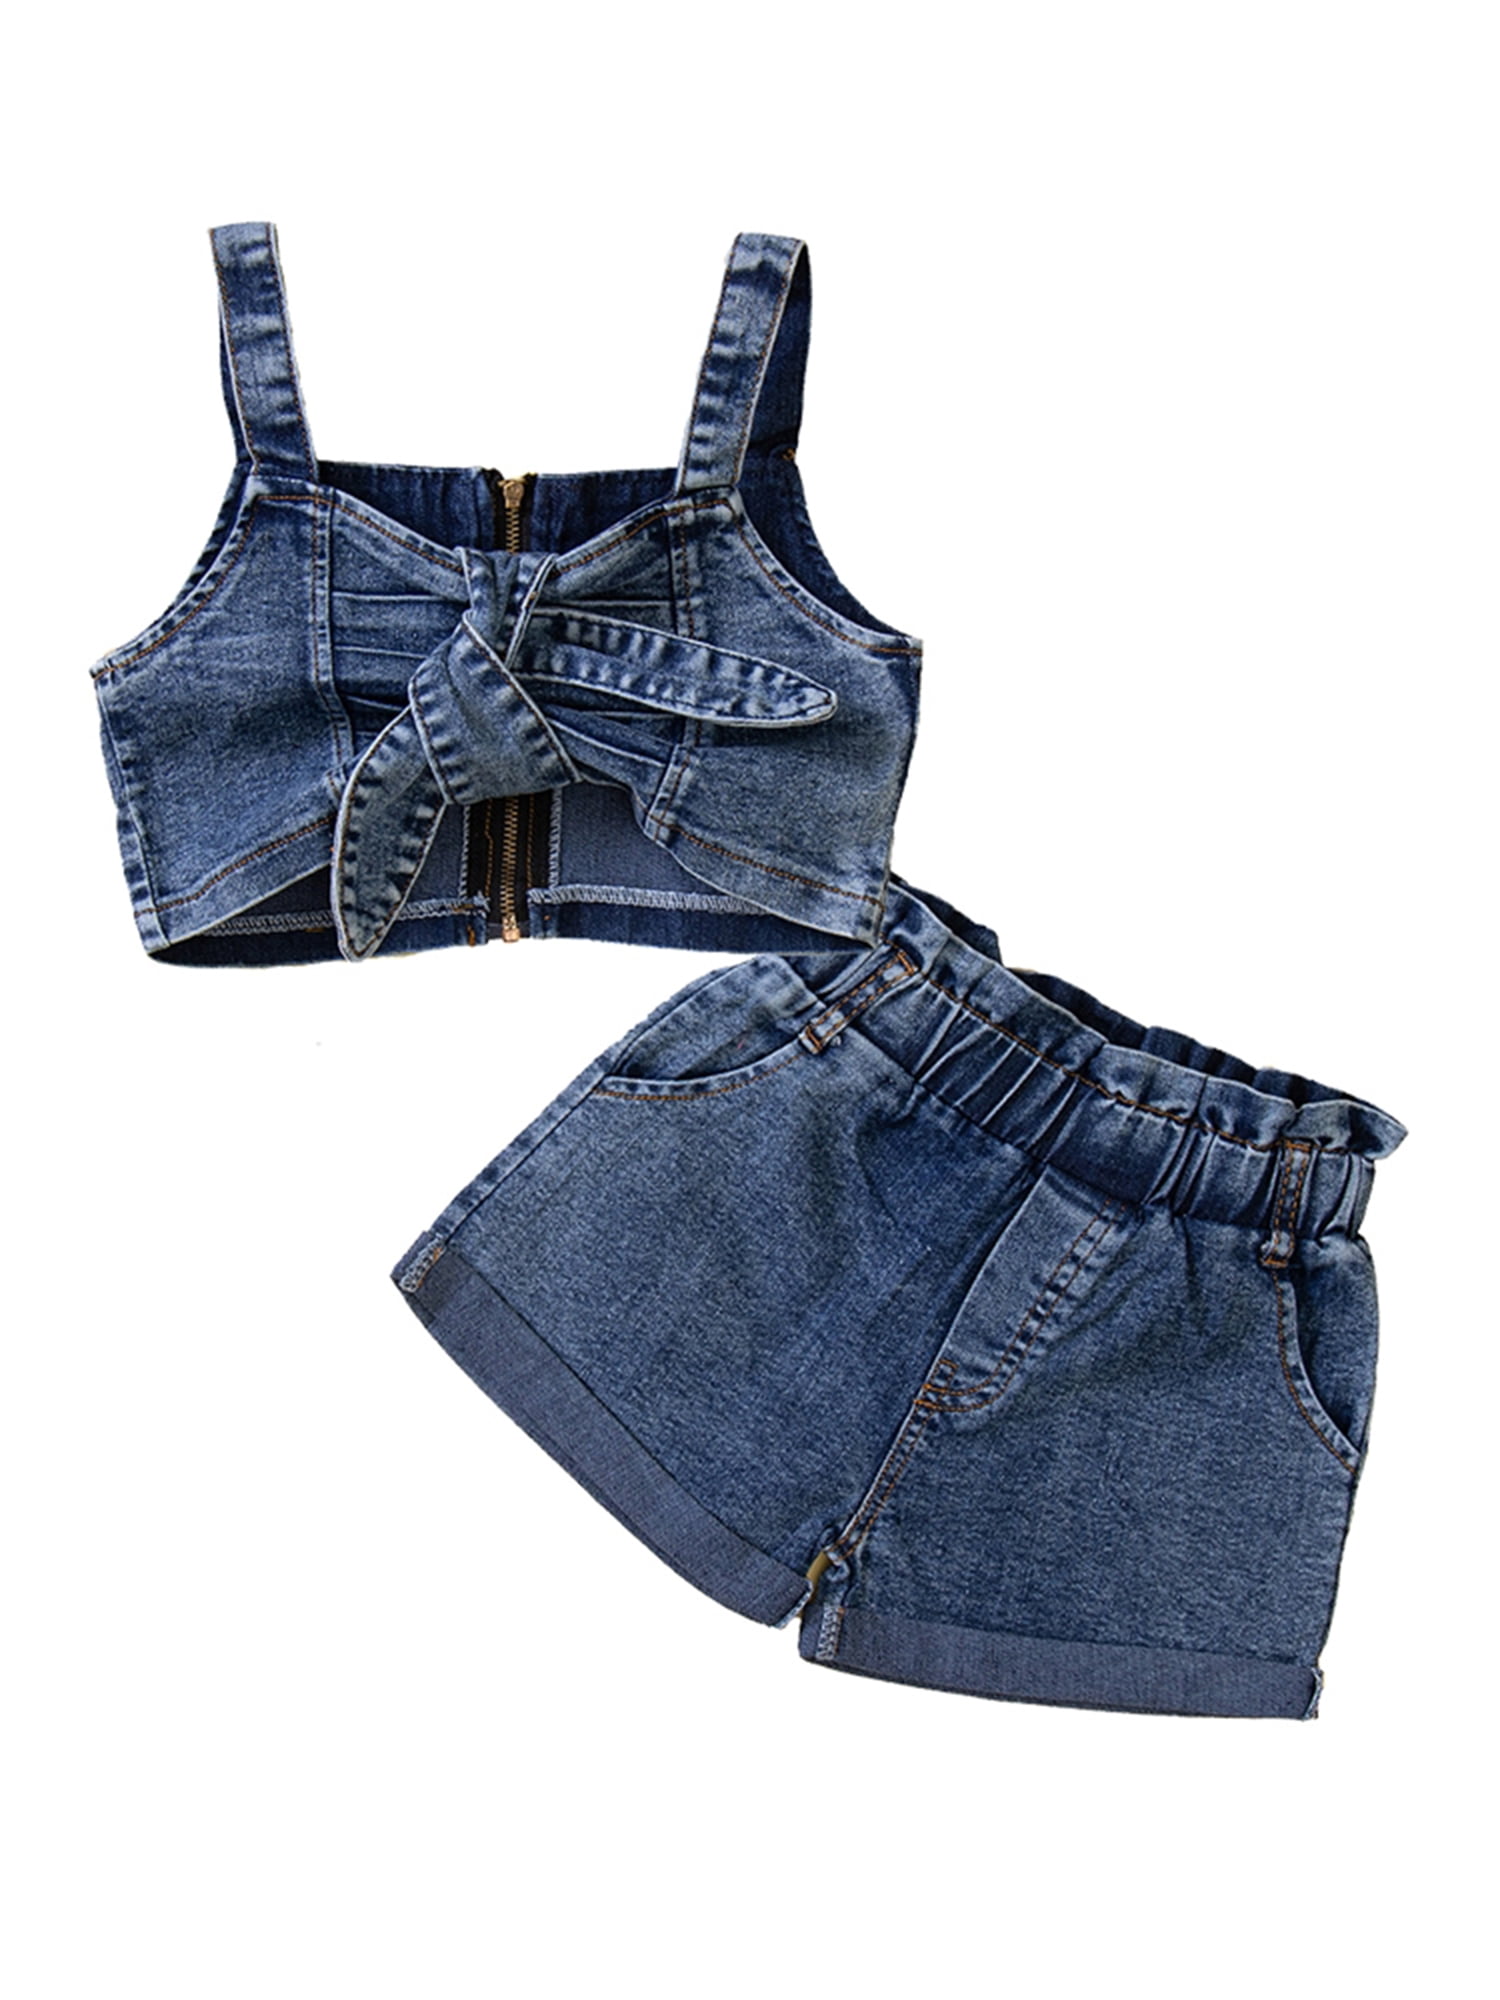 Summer Crop Top And Denim Shorts Set Out For Teenage Girls Outfit In Sizes  4 12 220620 From Jiao09, $14.18